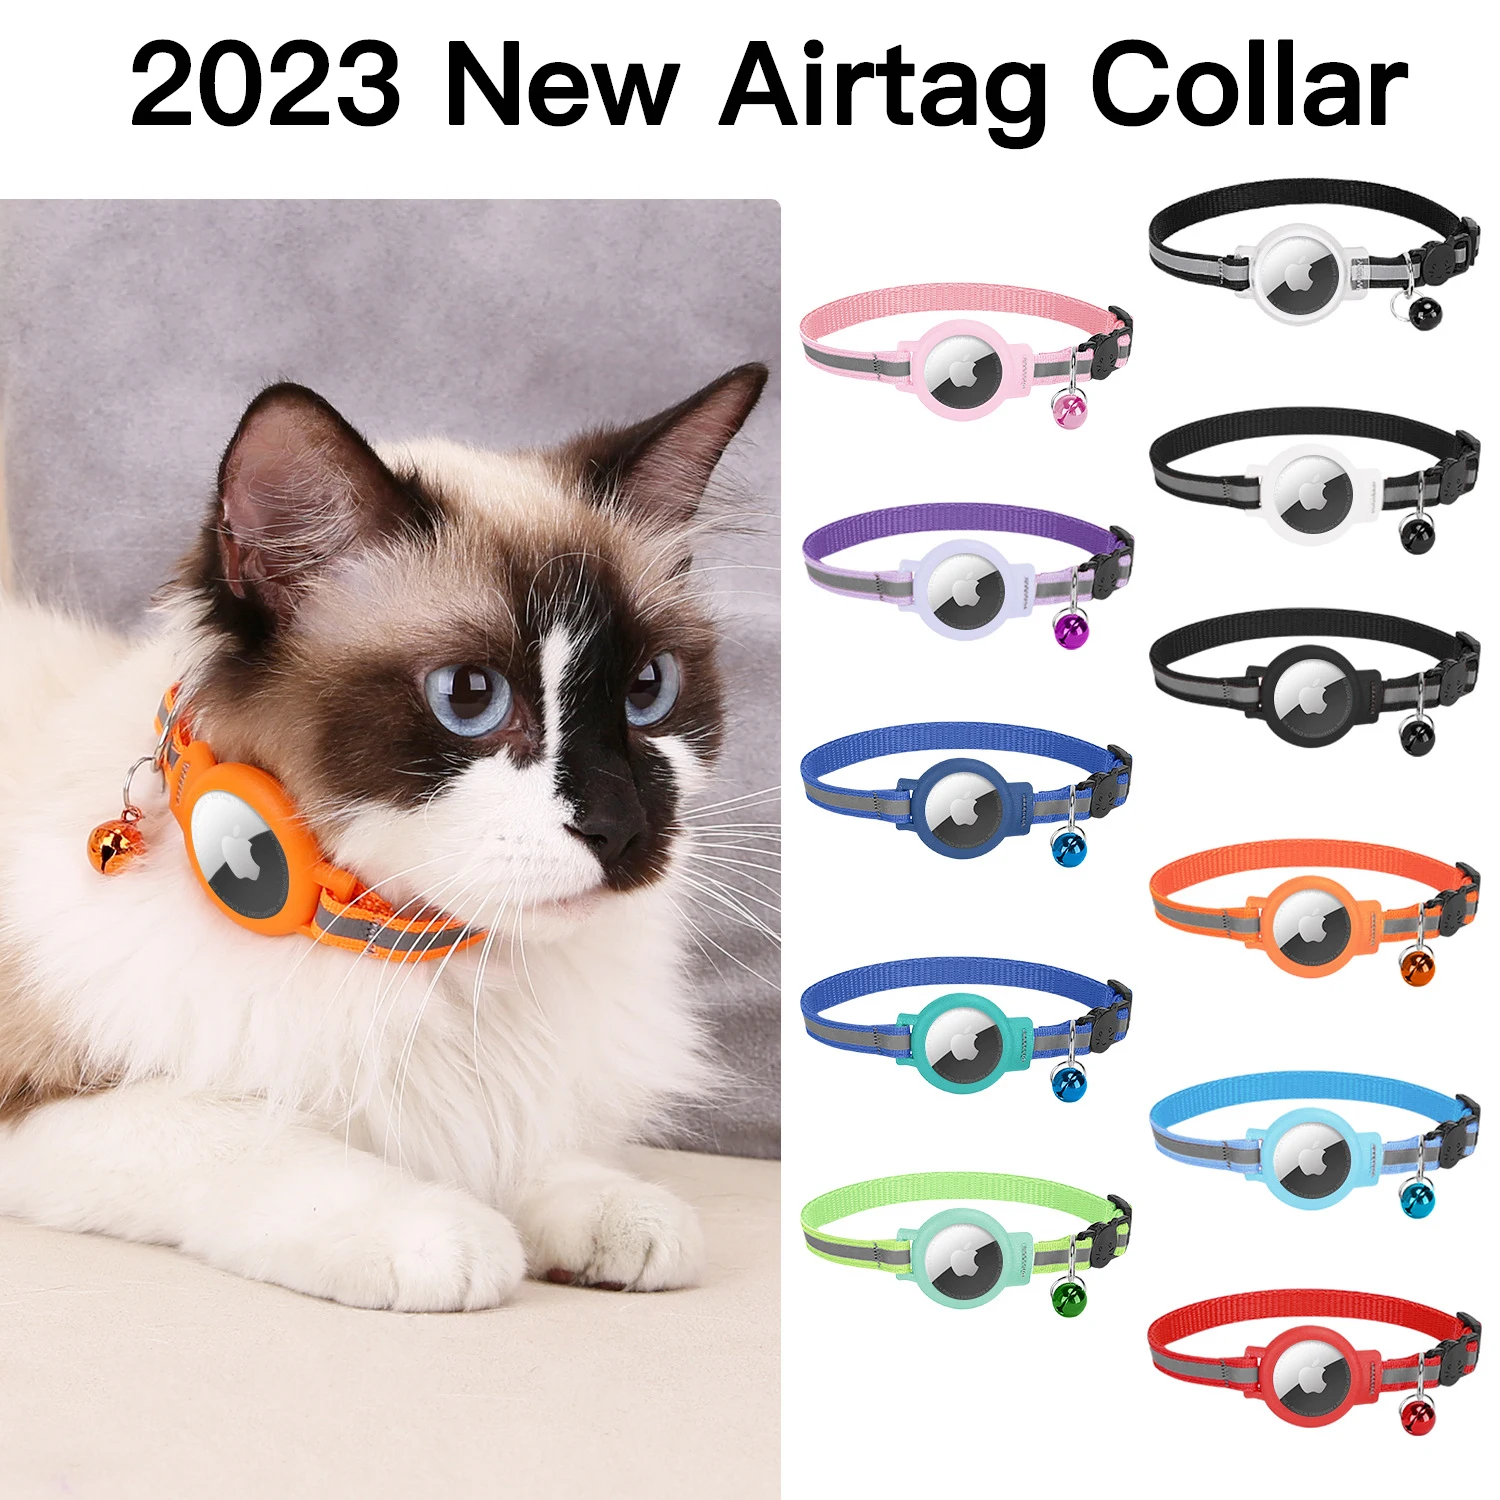 

Anti-Lost Cat Collar Apple Airtag Tracker Protective Case With Bell Reflective Cat Necklace Kitten Products Pet GPS Accessories